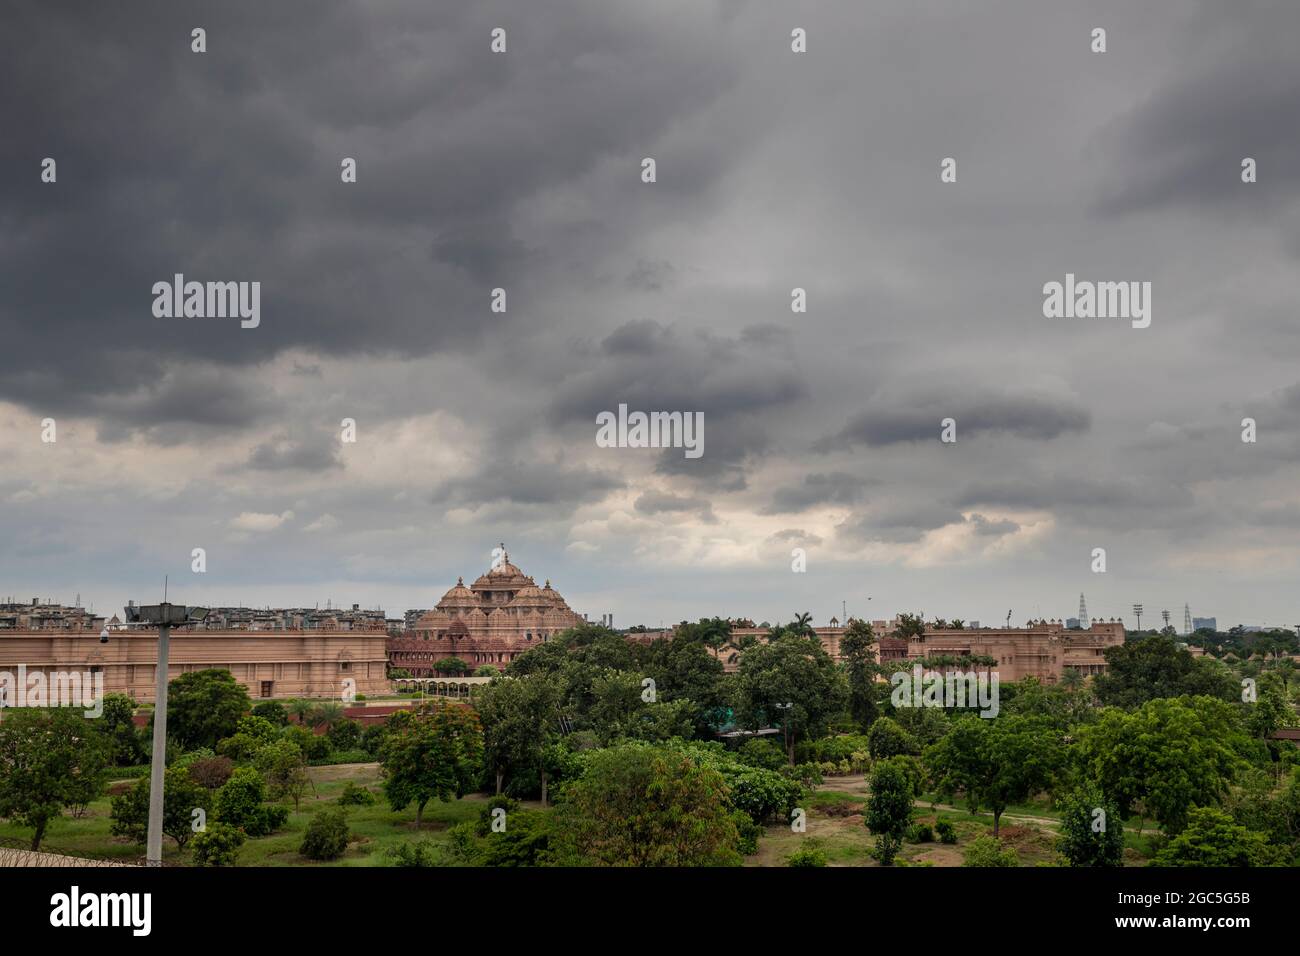 Wide angle view of the famous Akshardham temple in New Delhi Stock Photo